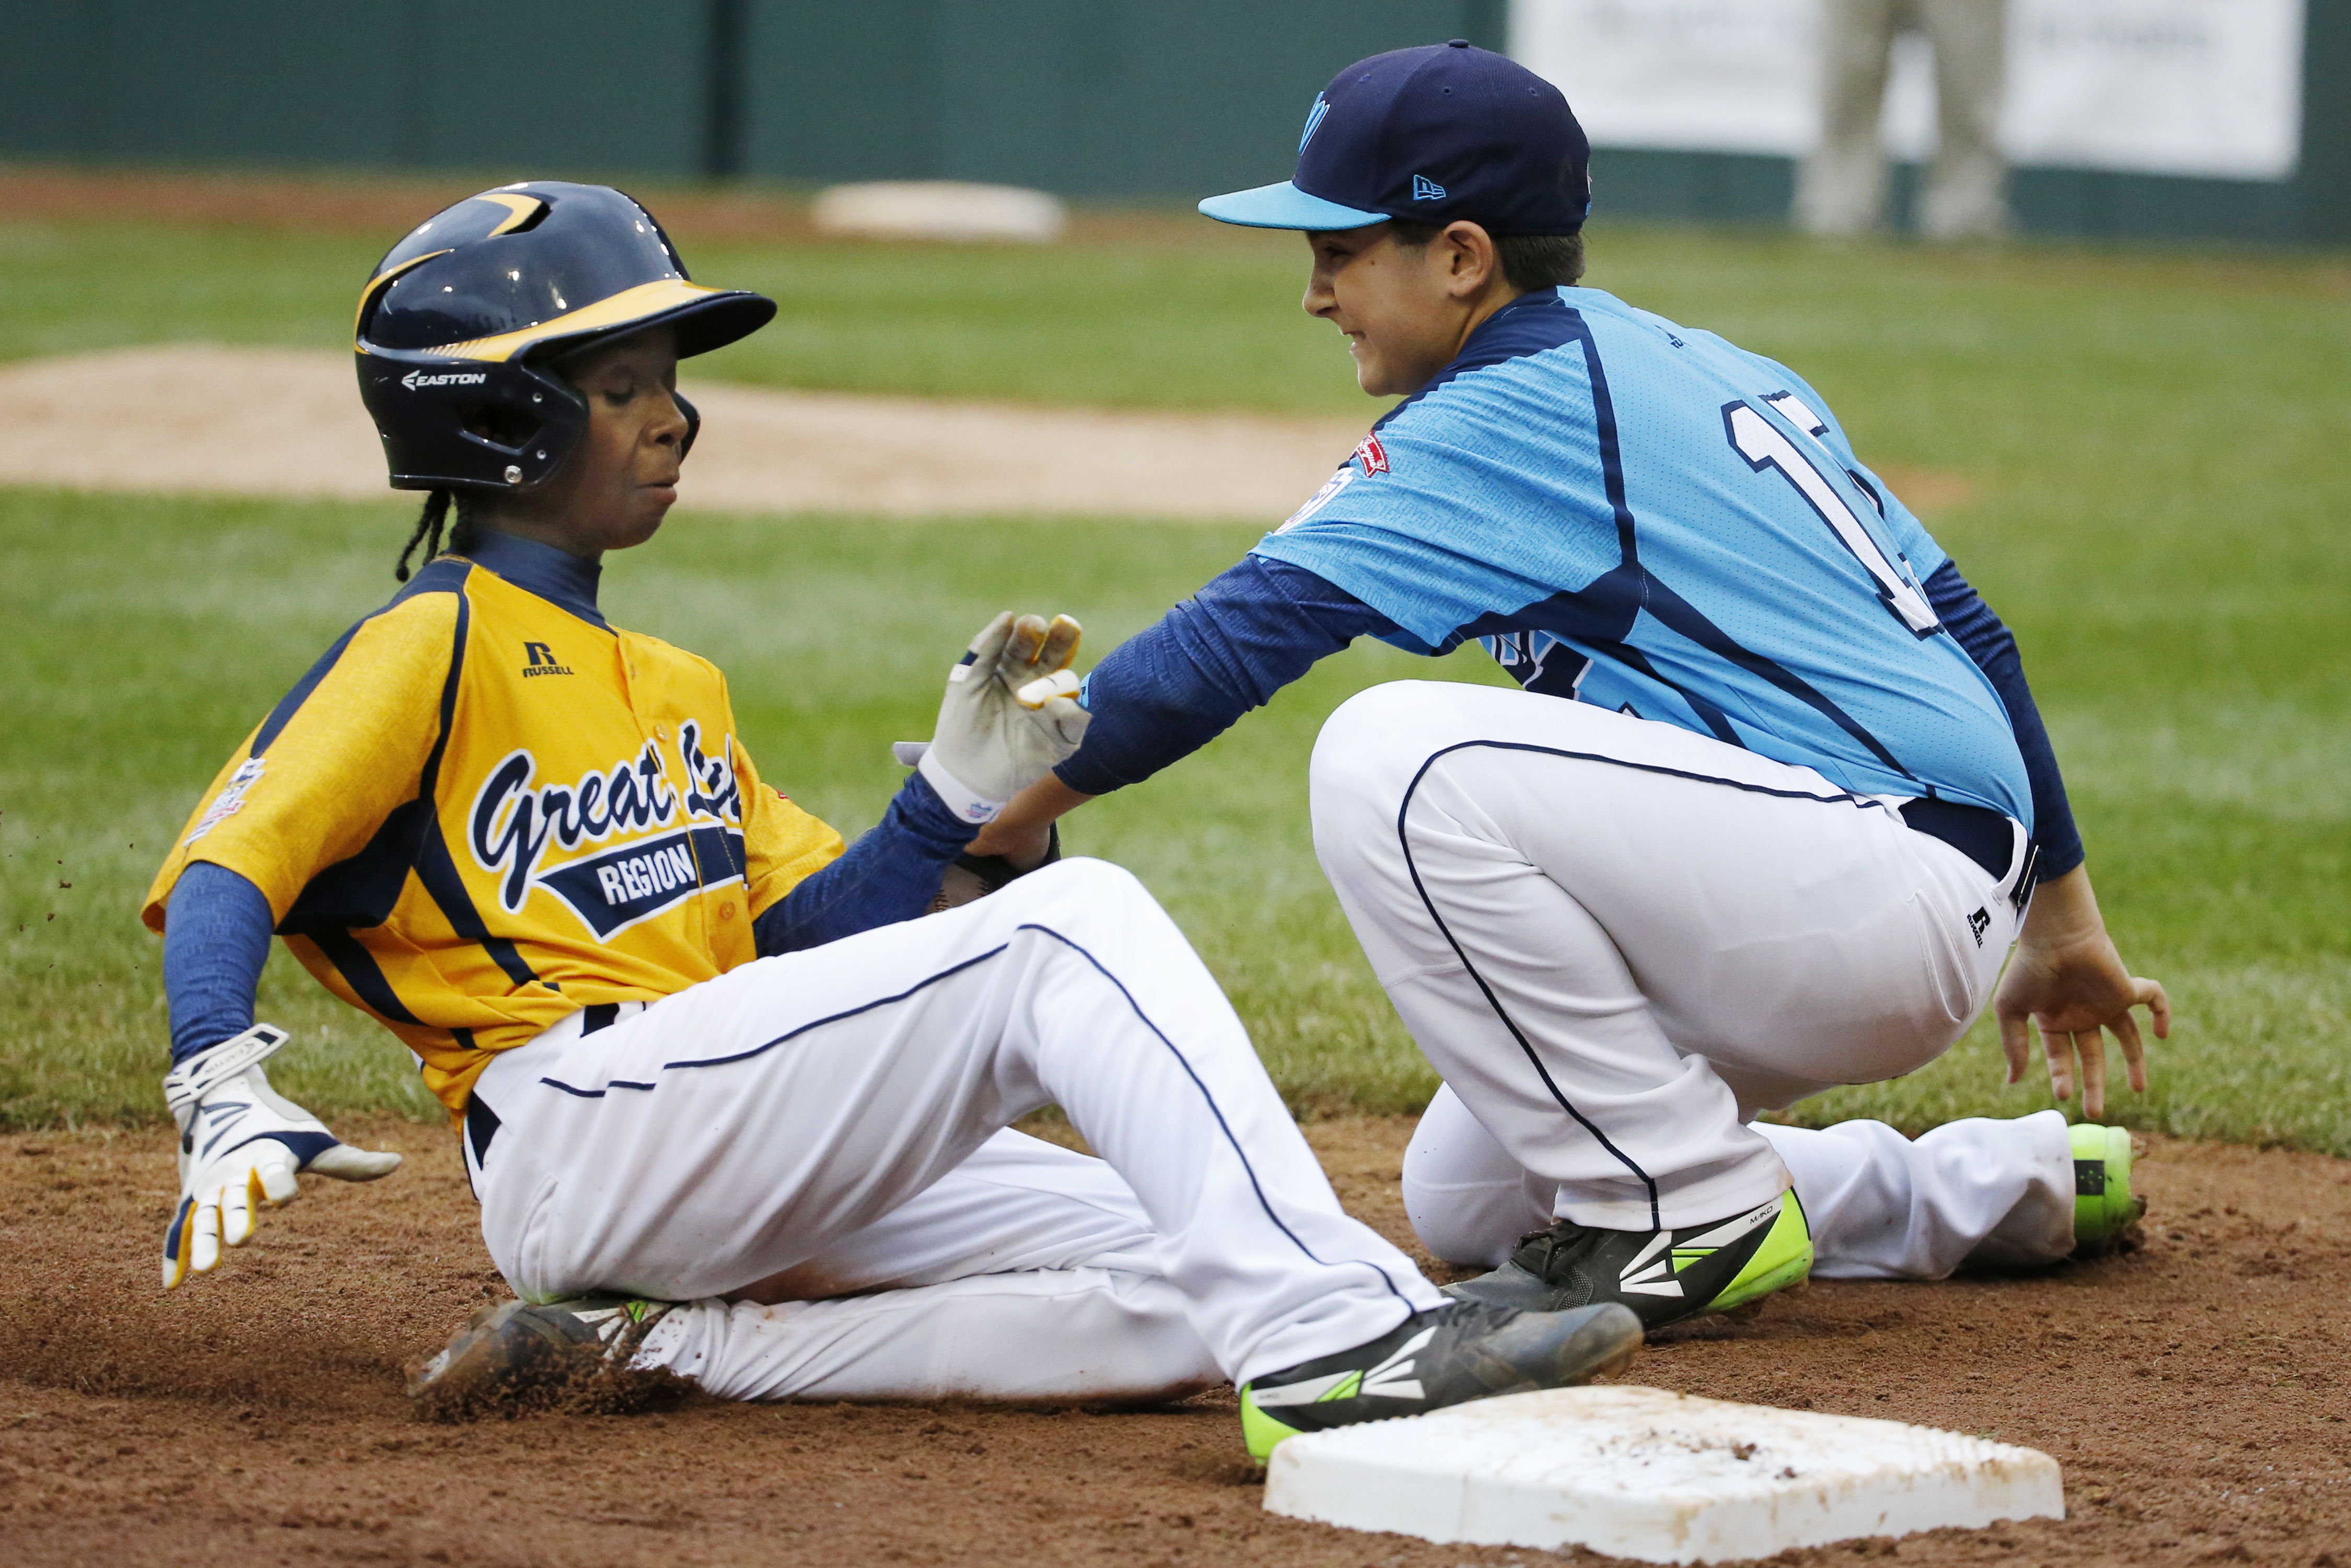 Chicago's Jaheim Benton, left, slides safely into third ahead of the tag by Las Vegas' Dillon Jones in the fifth inning of the United States Championship game at the Little League World Series tournament in South Williamsport, Pa., Saturday, Aug. 23, 2014. Chicago won 7-5. (AP Photo/Gene J. Puskar